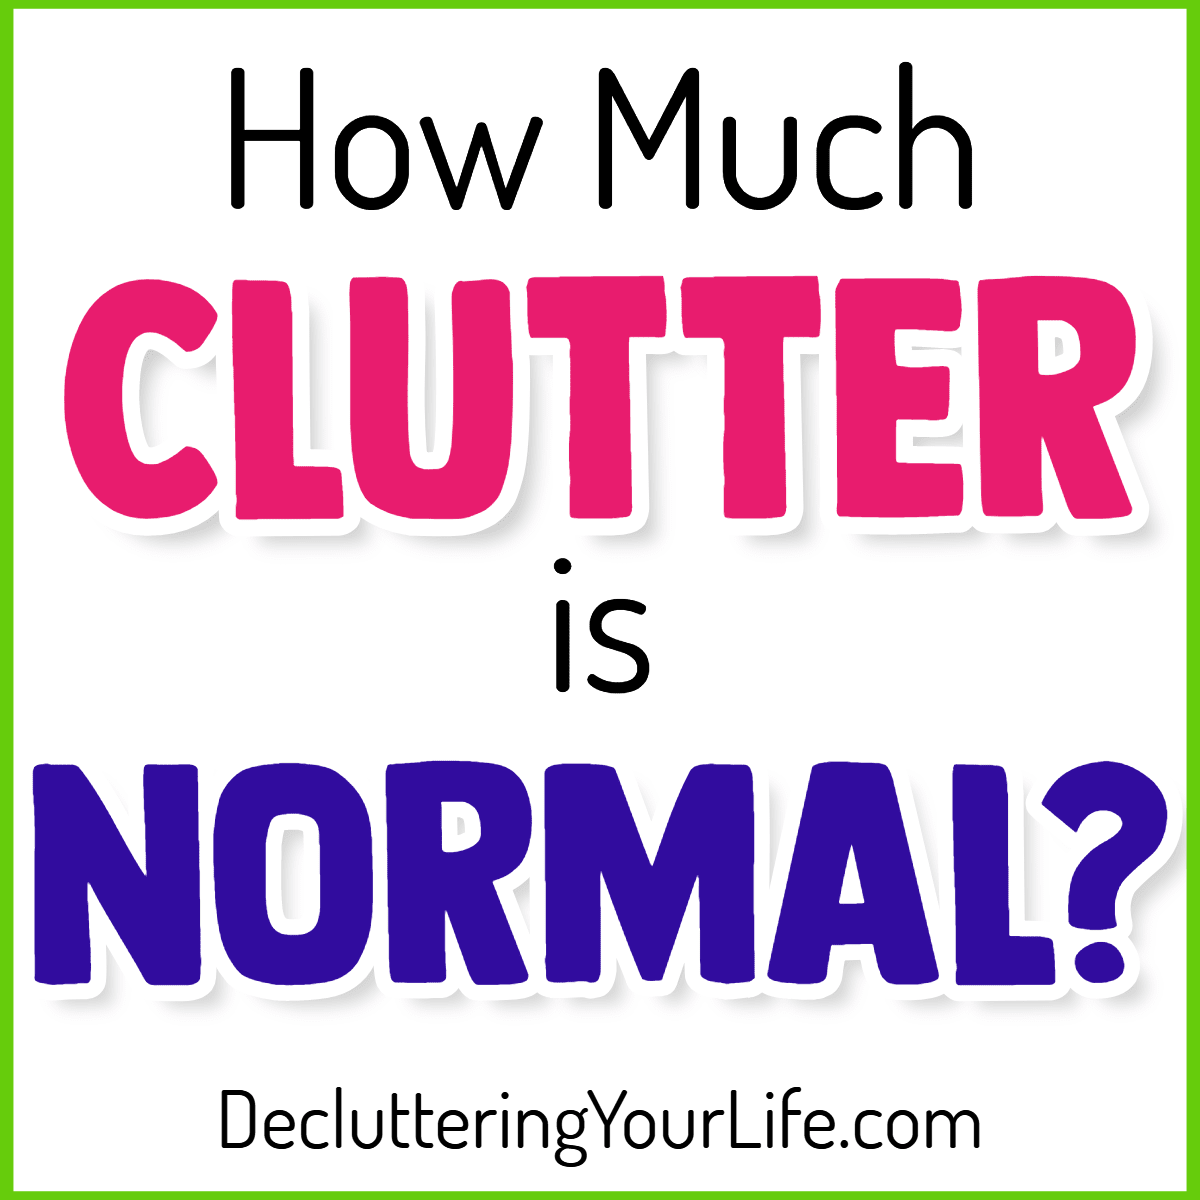 Decluttering Tips for packrats and Home Organization Hacks for Hoarders - If you're overwhelmed by clutter, you might wonder "How MUCH Clutter is NORMAL?"  It's overwhelming to get organized, set up storage and organization systems, and clear the clutter when you might be a hoarder and have too much stuff - and it's NOT an easy DIY project for you.  These checklists are good for your household notebook to help you clean and organize your home.